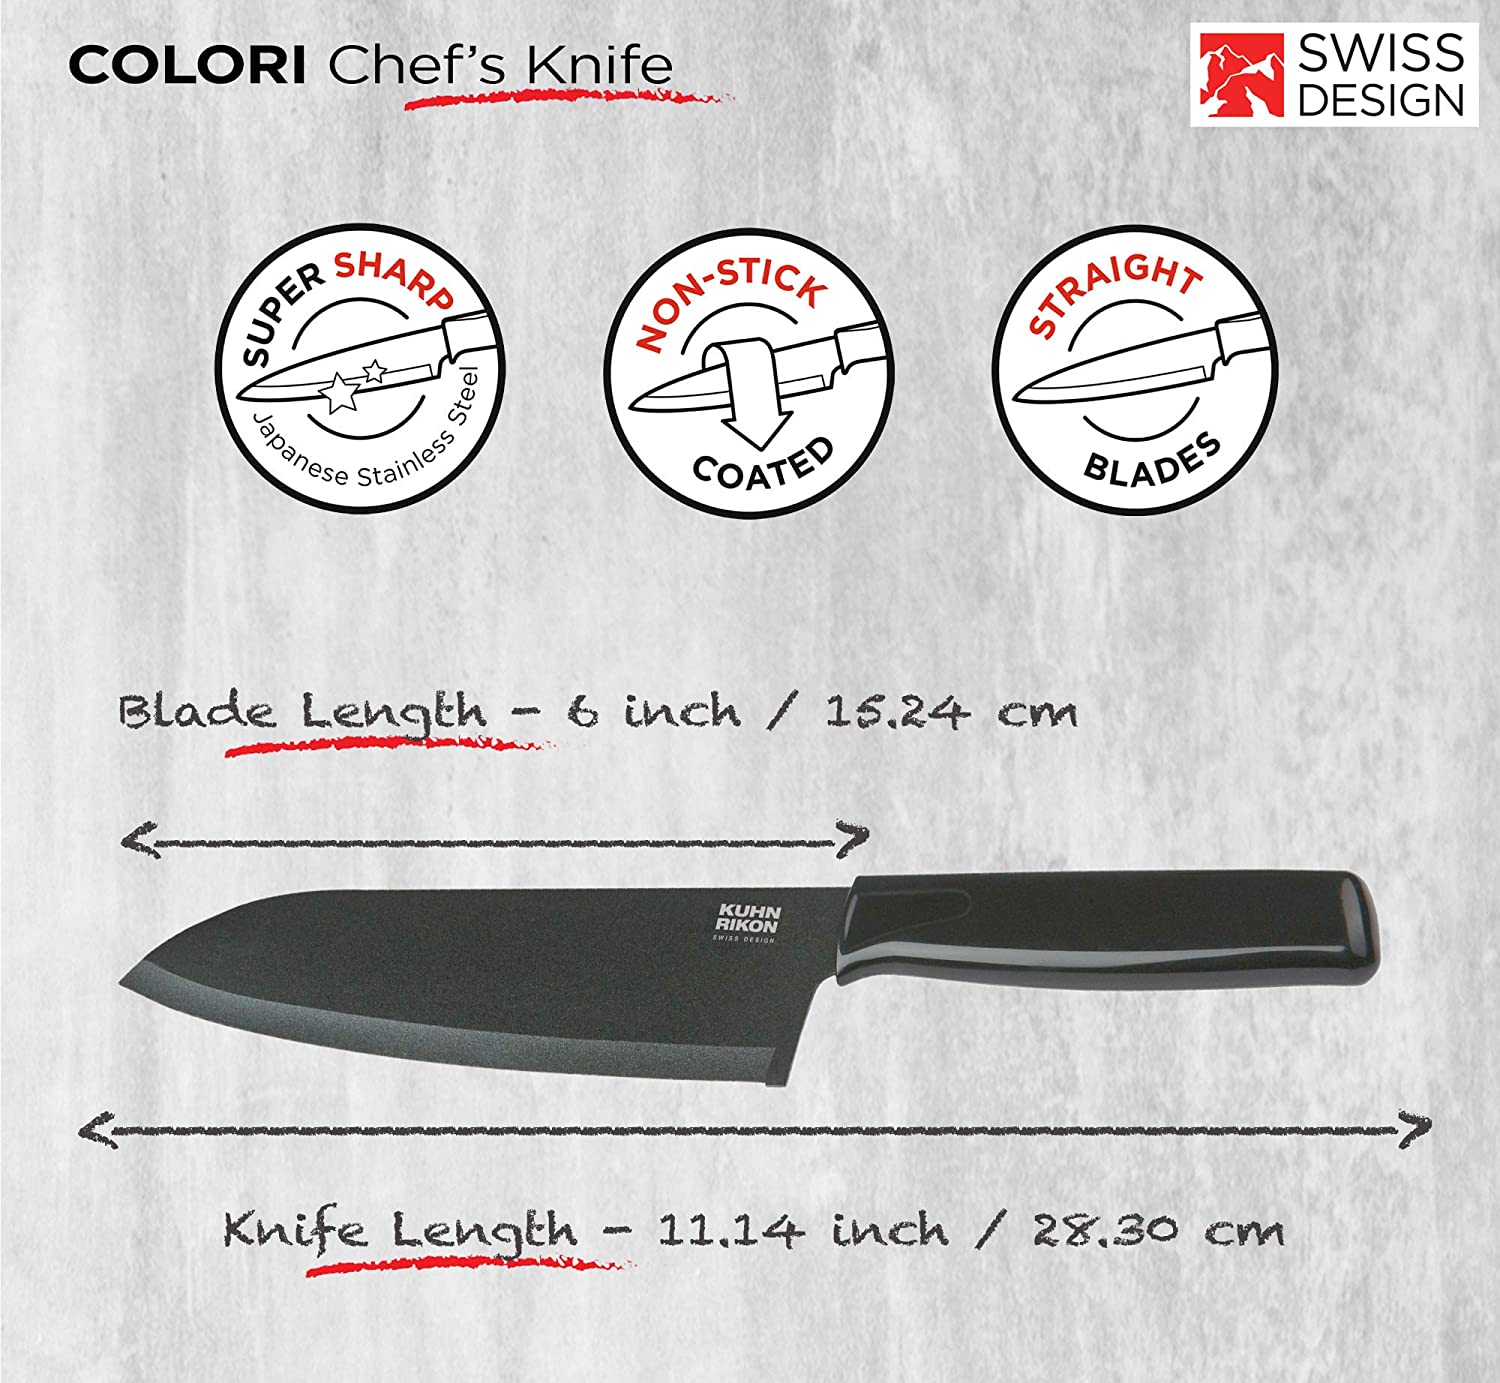 Kuhn Rikon COLORI Chef’s Knife with Safety Sheath